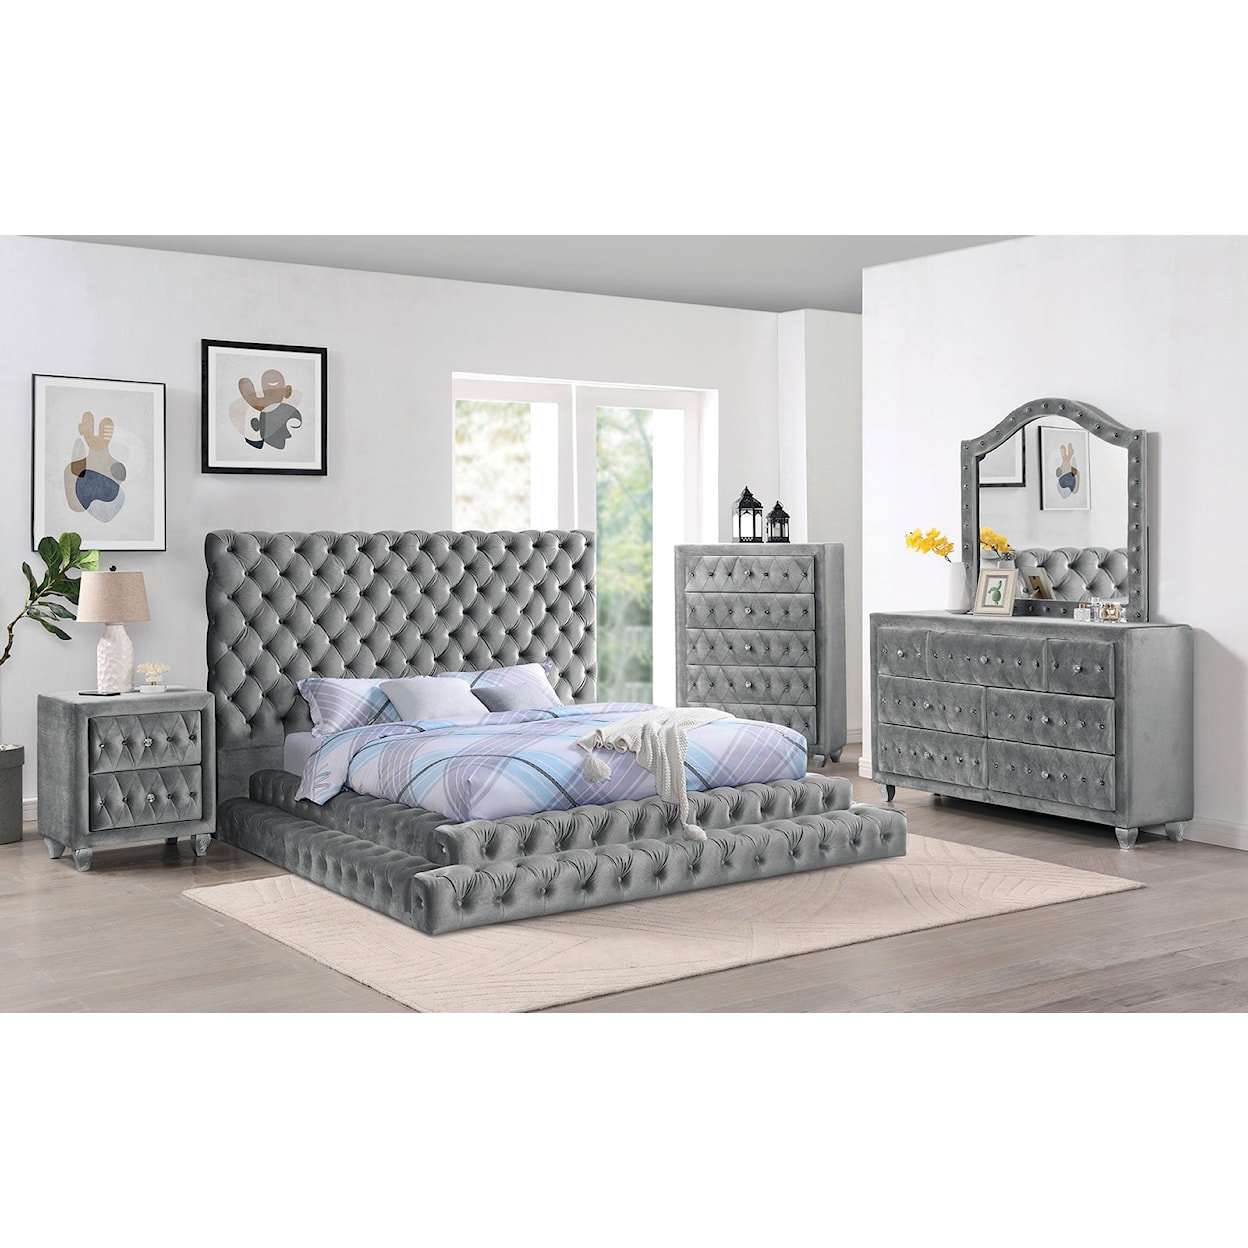 Furniture of America Stefania 5-Piece Queen Bedroom Set with Drawer Chest